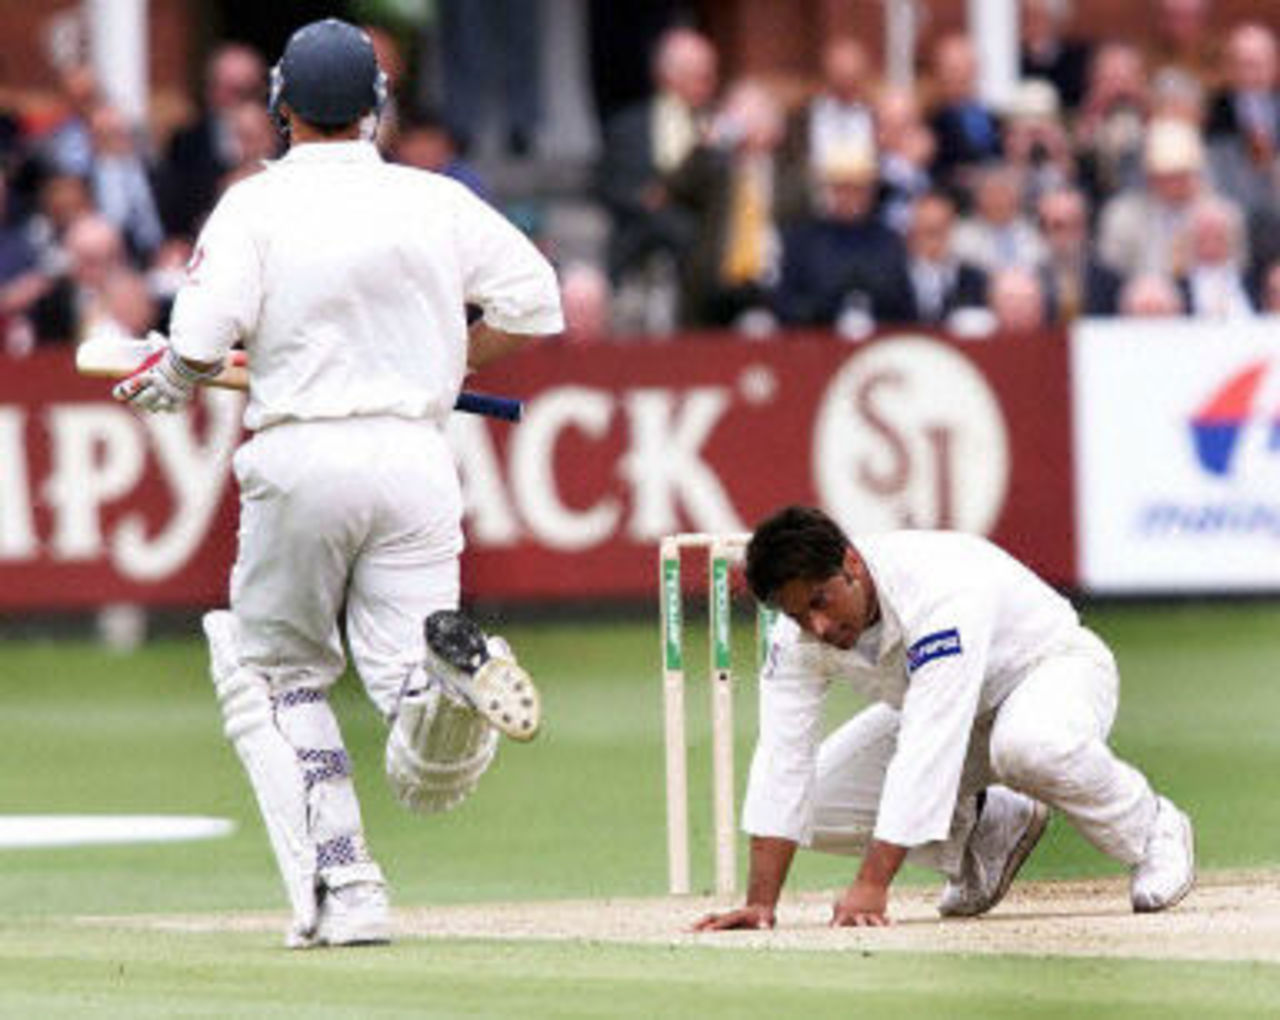 Shoaib Akhtar looks frustrated, day 3, 1st Test at Lord's, 17-21 May 2001.